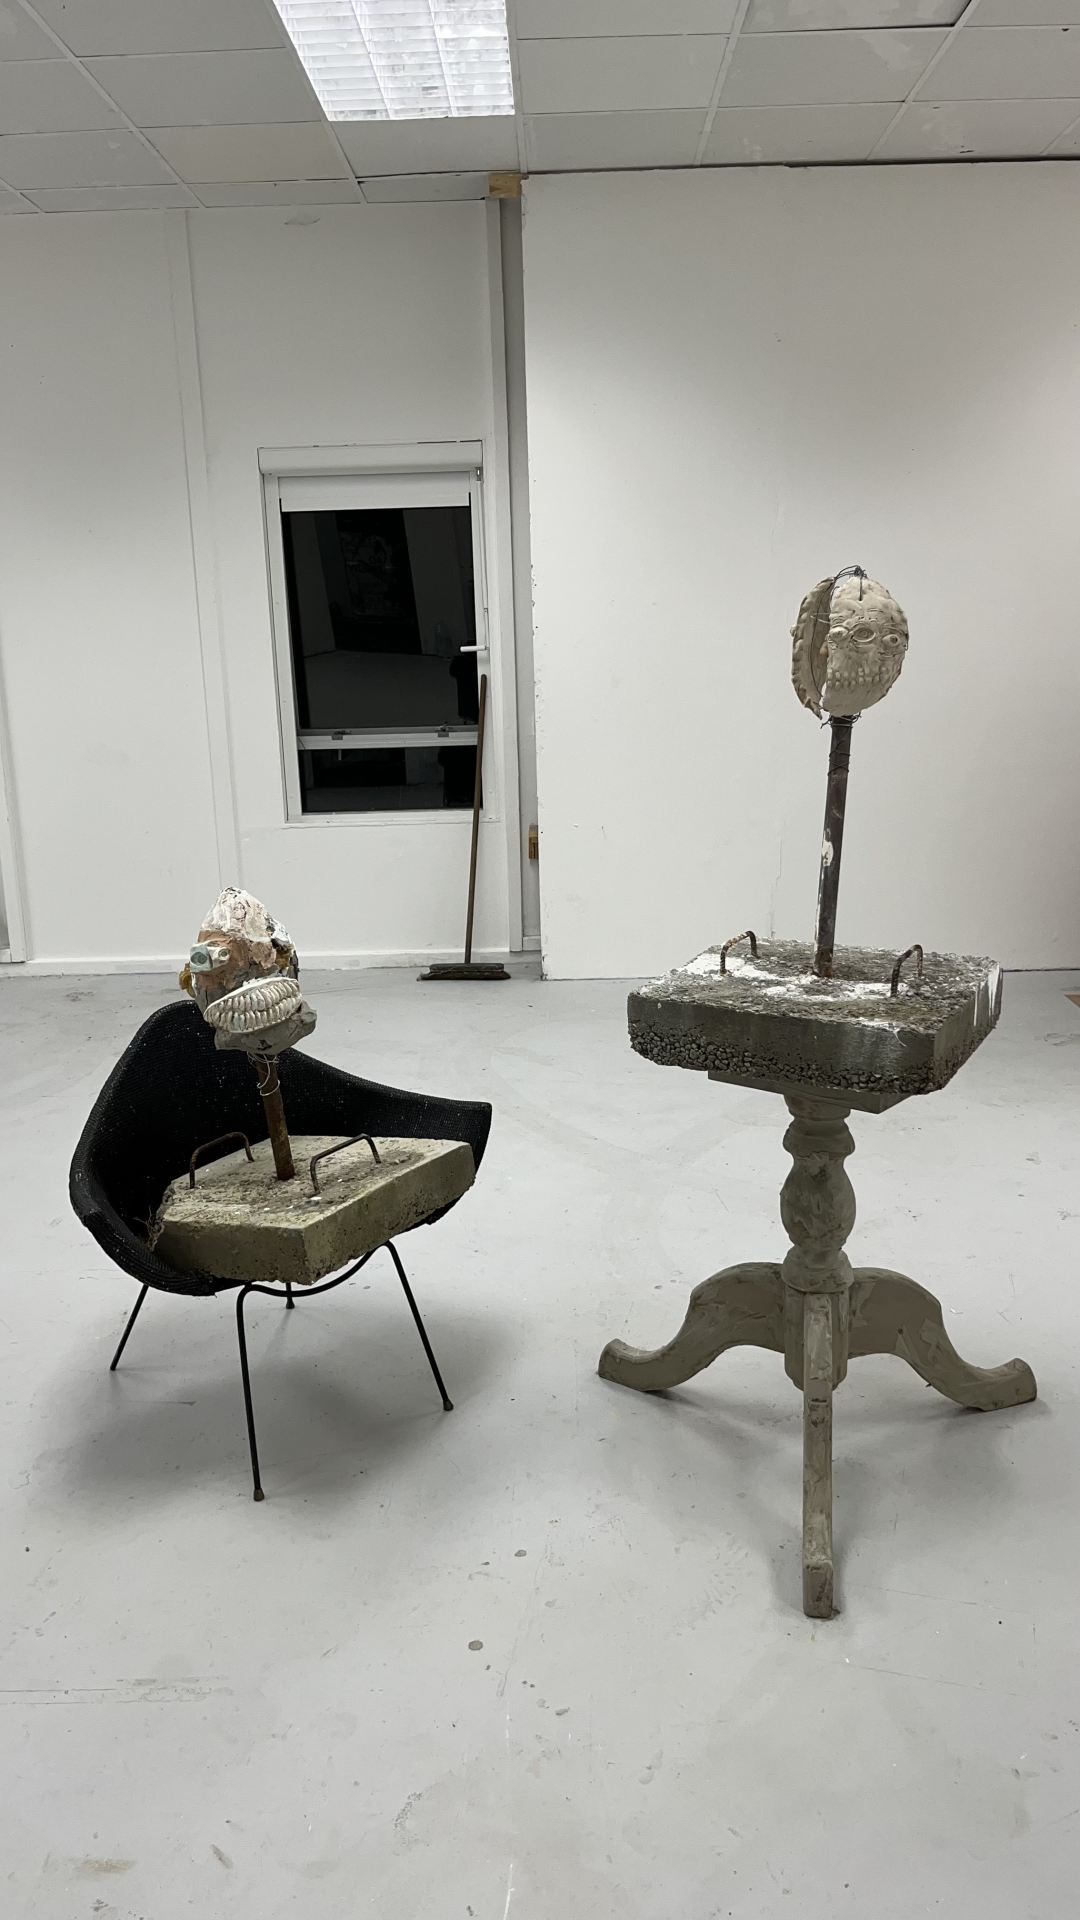 An image of two figurative sculptures standing in a grey room.